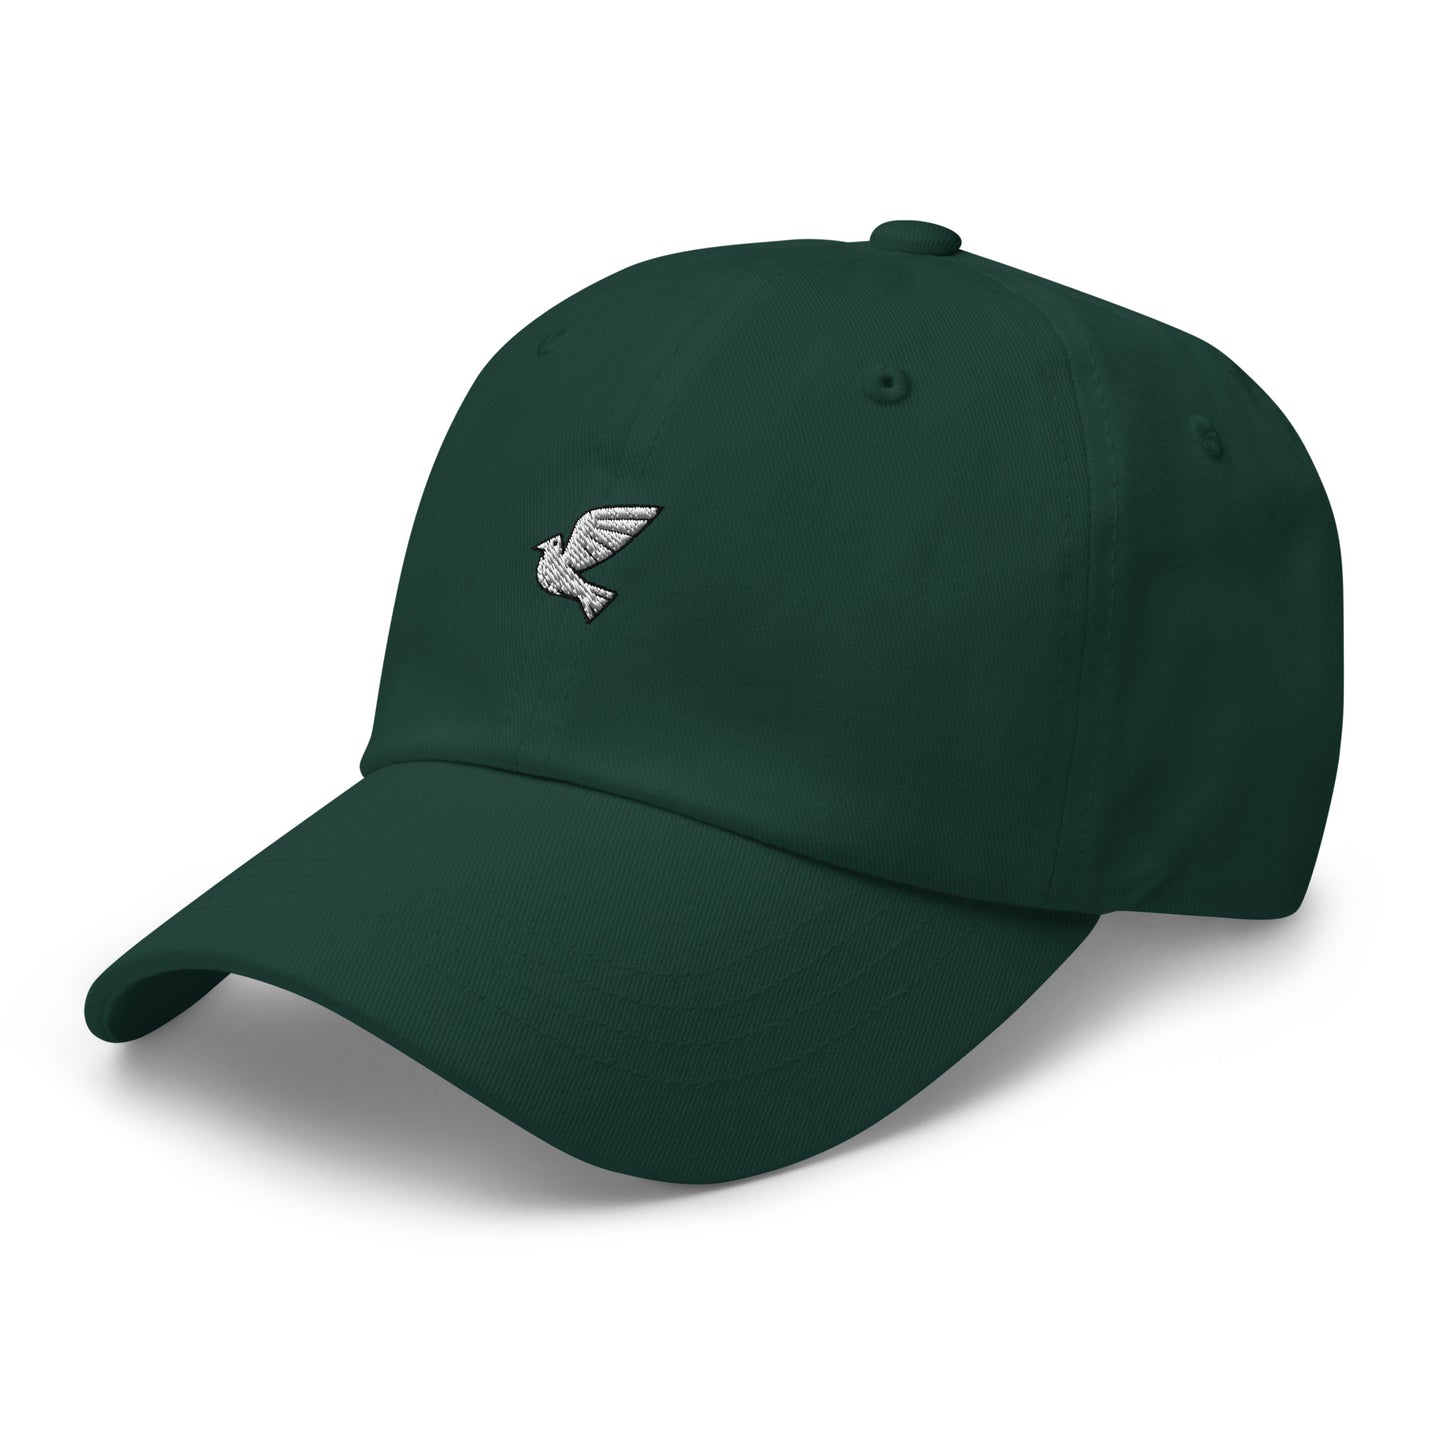 cap-from-the-front-with-holy spirit-symbol